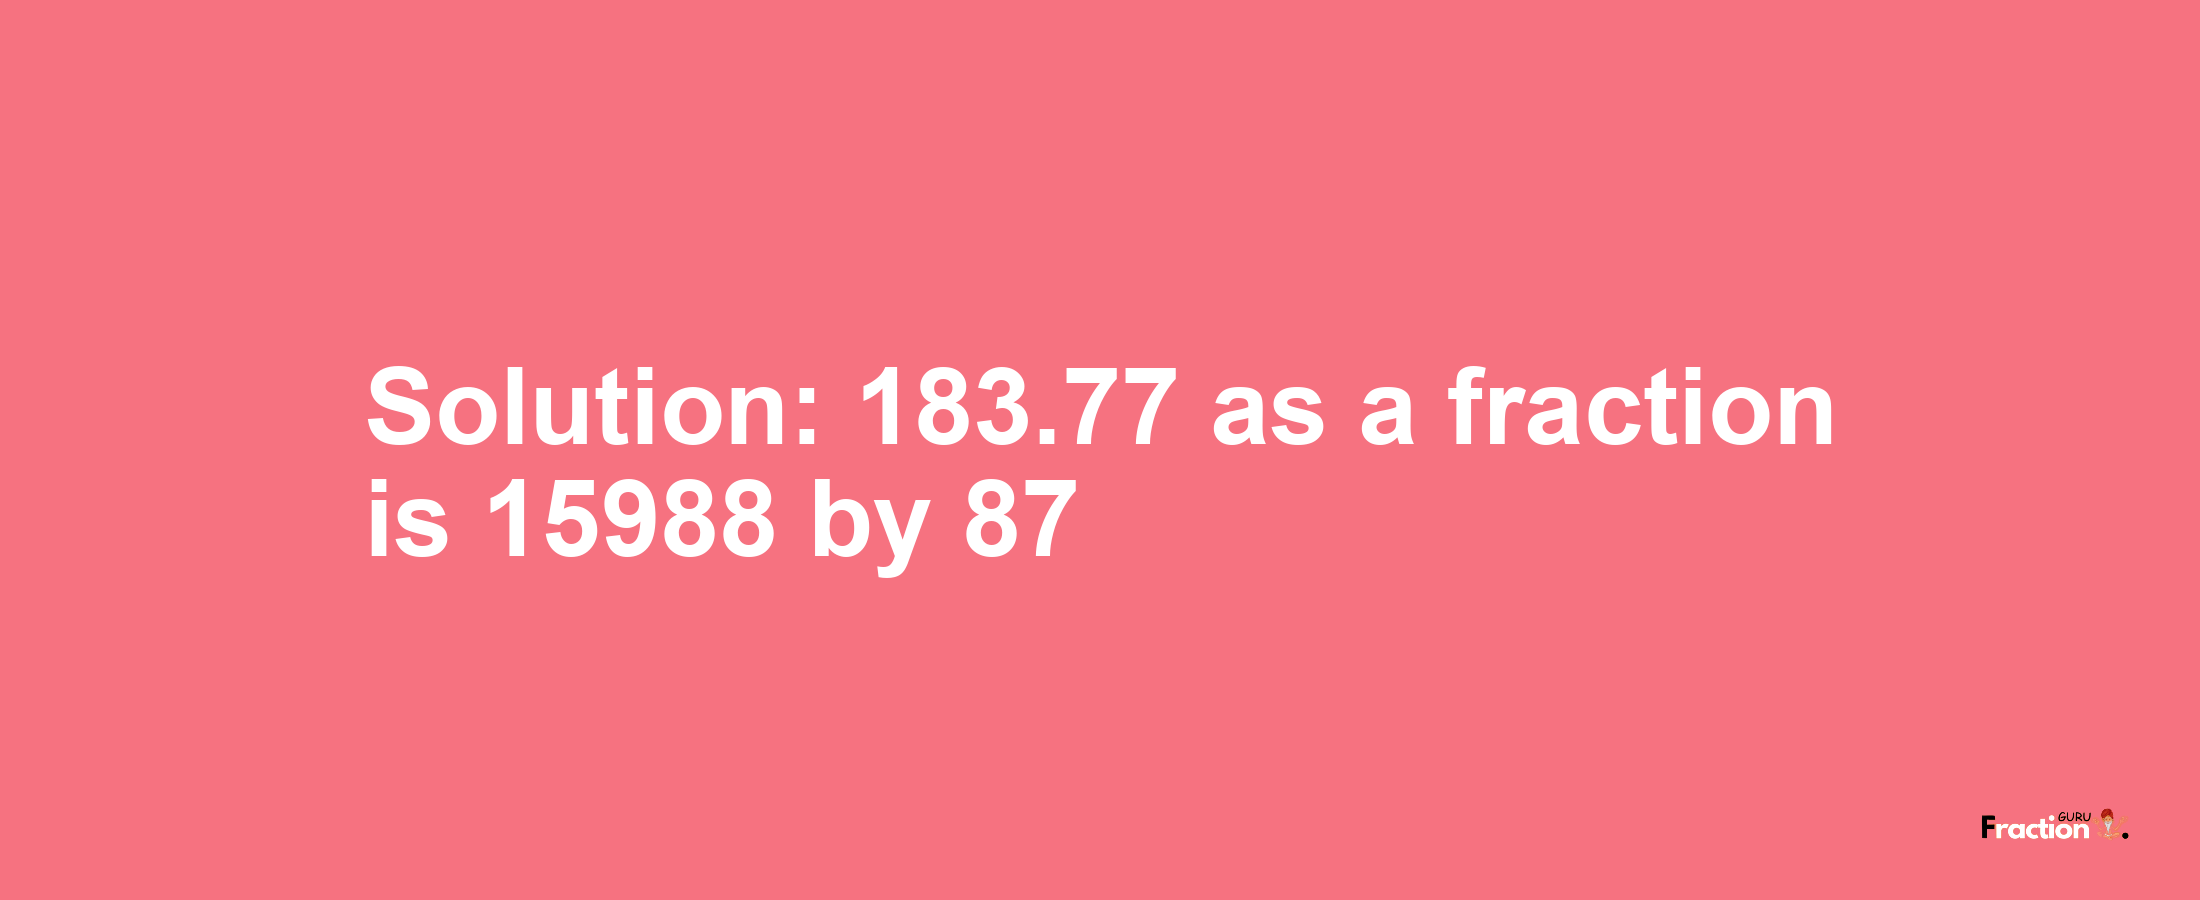 Solution:183.77 as a fraction is 15988/87